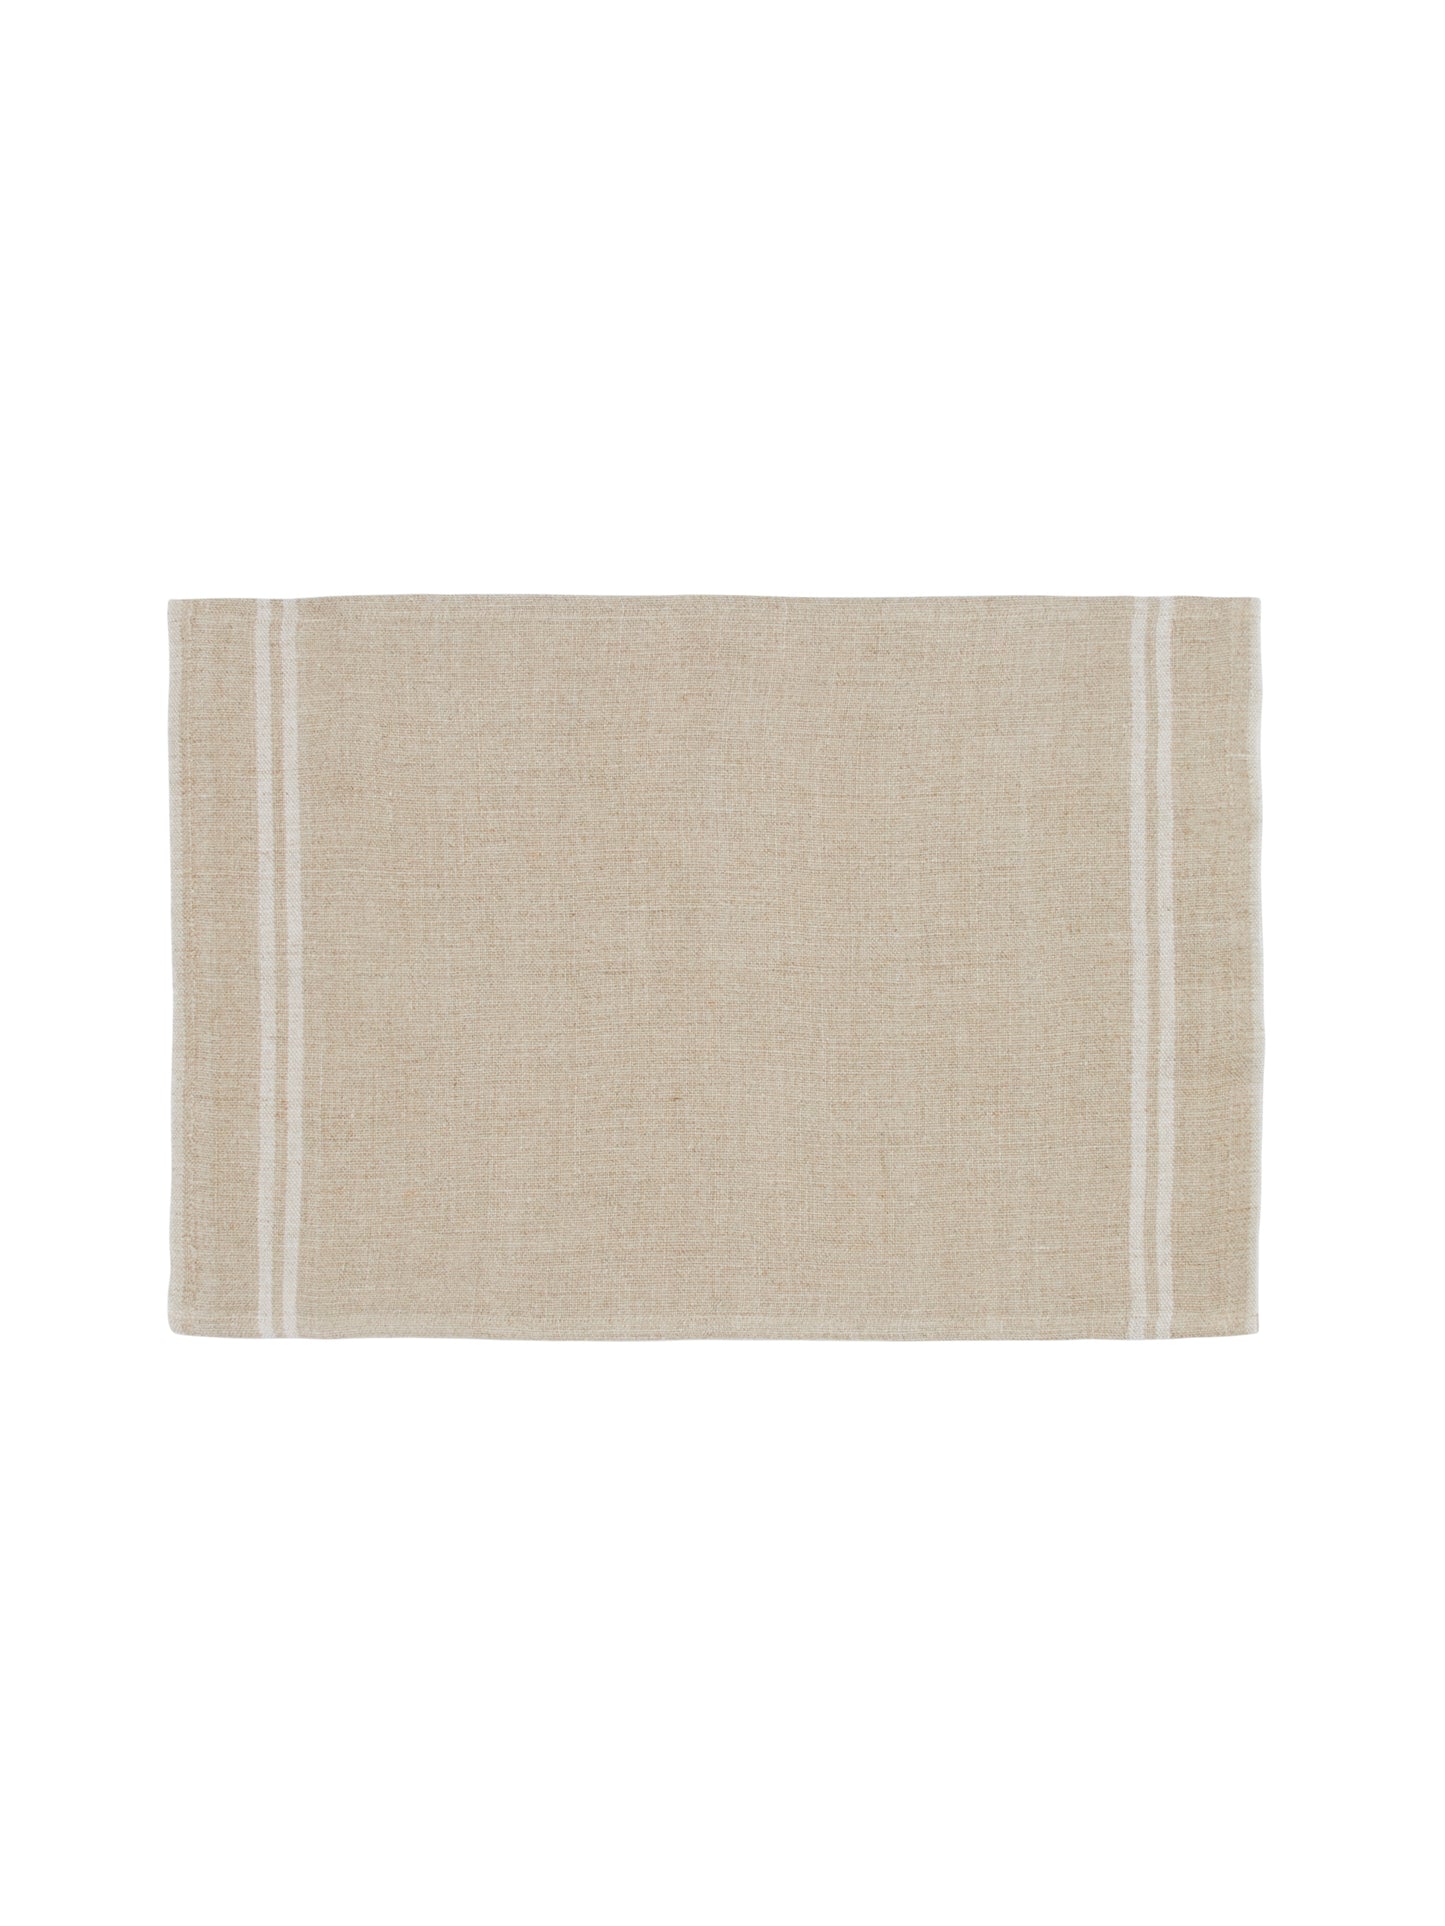 Charvet Editions Country Linen Collection White Placemats Weston Table